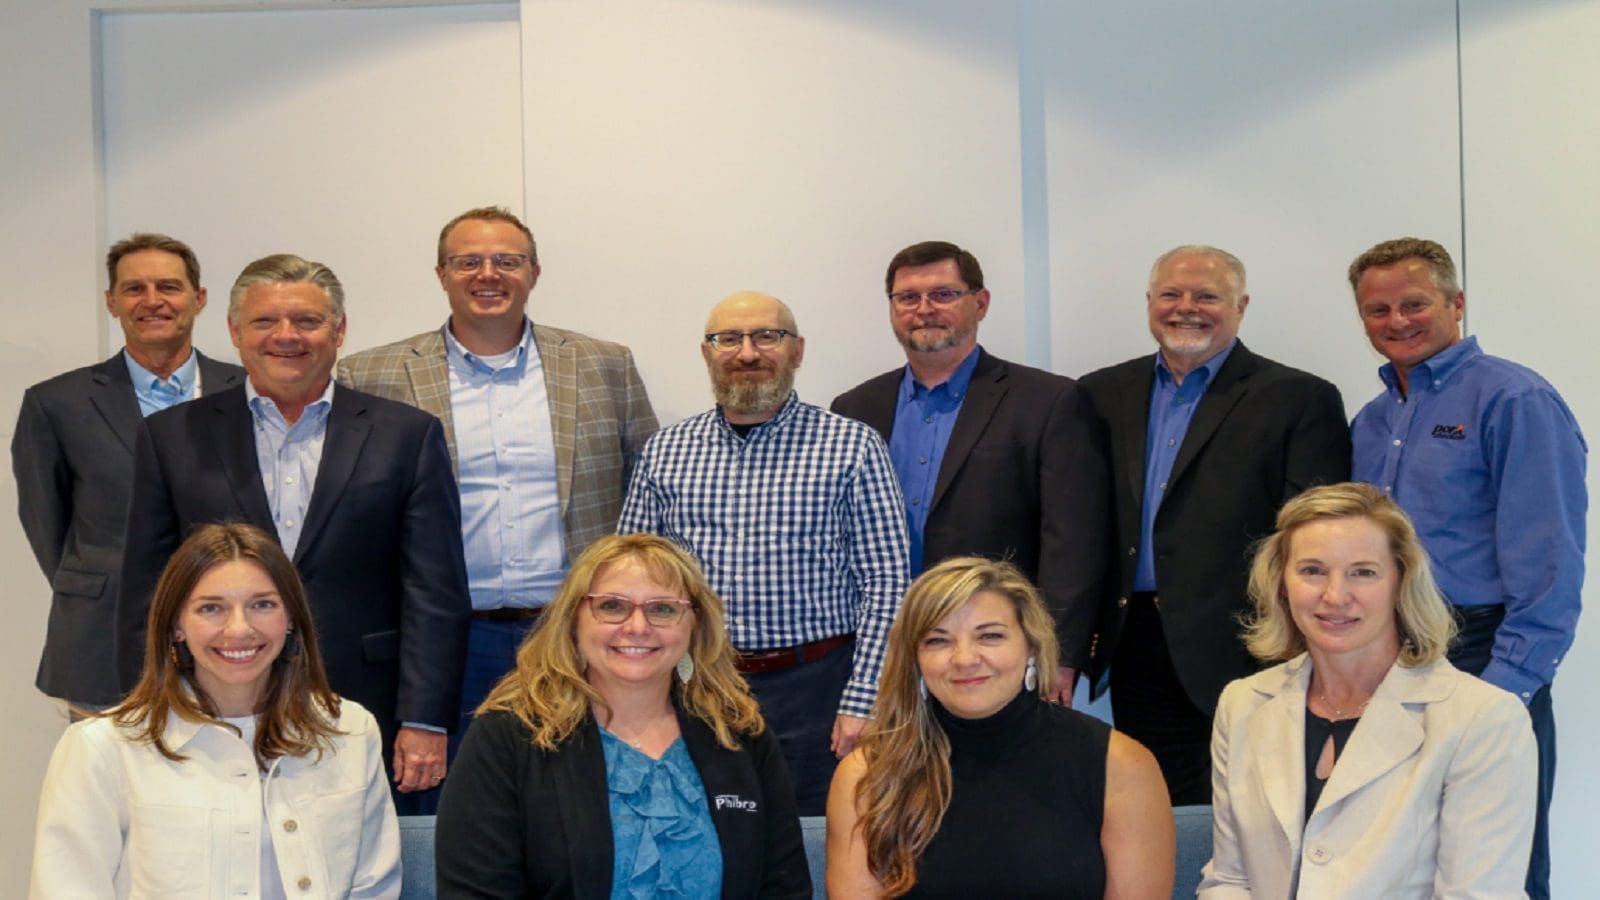 IFEEDER installs new board members to support the animal nutrition industry